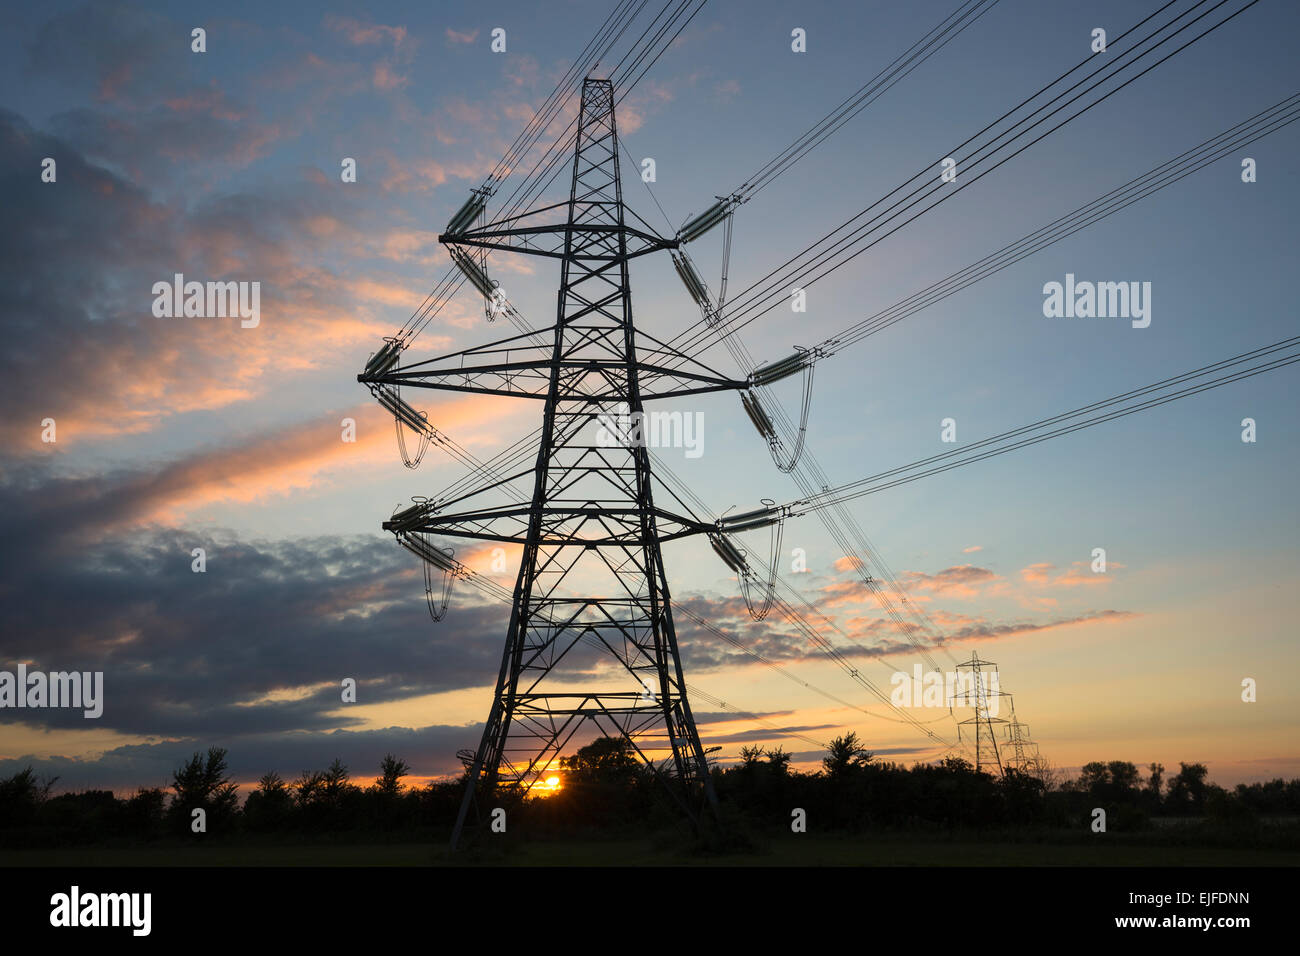 Two forms of energy - setting sun behind electricity pylon and power cables in landscape at sunset in England, UK Stock Photo